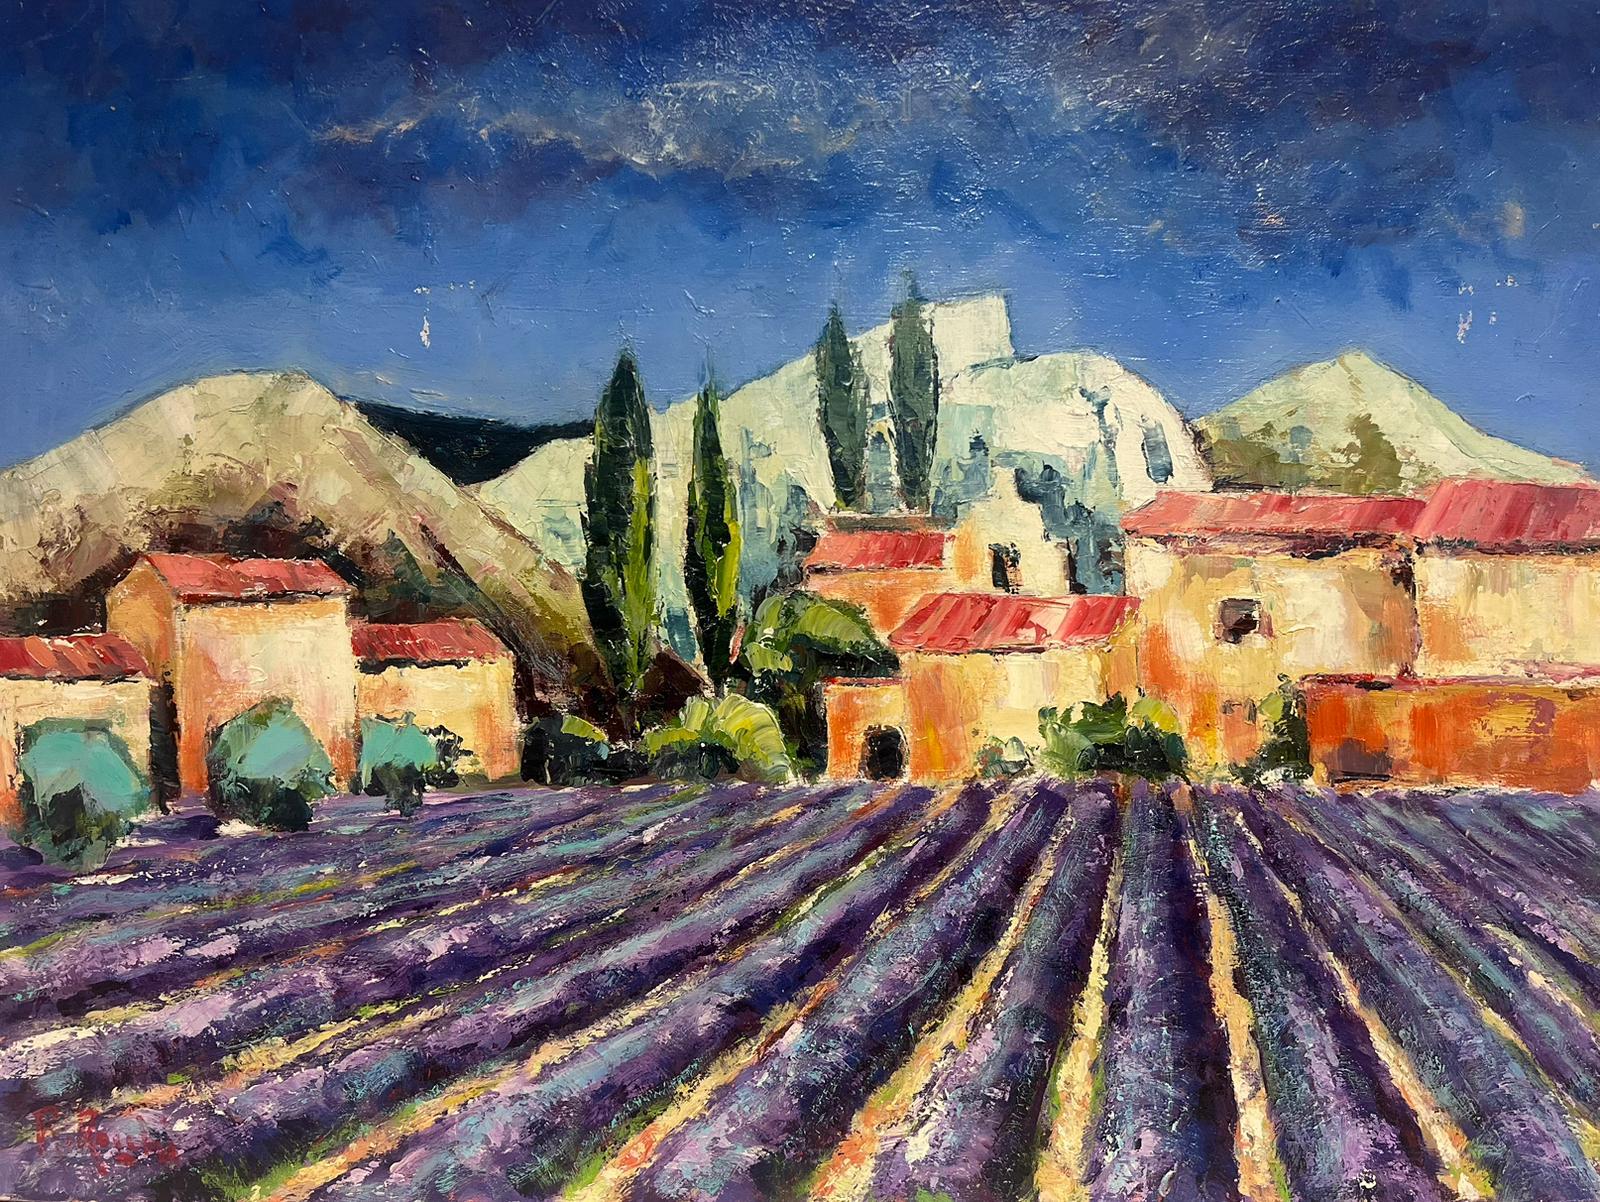 French School Landscape Painting - Lavender Fields in Provence Old Stone Mas Houses Large French Oil Painting